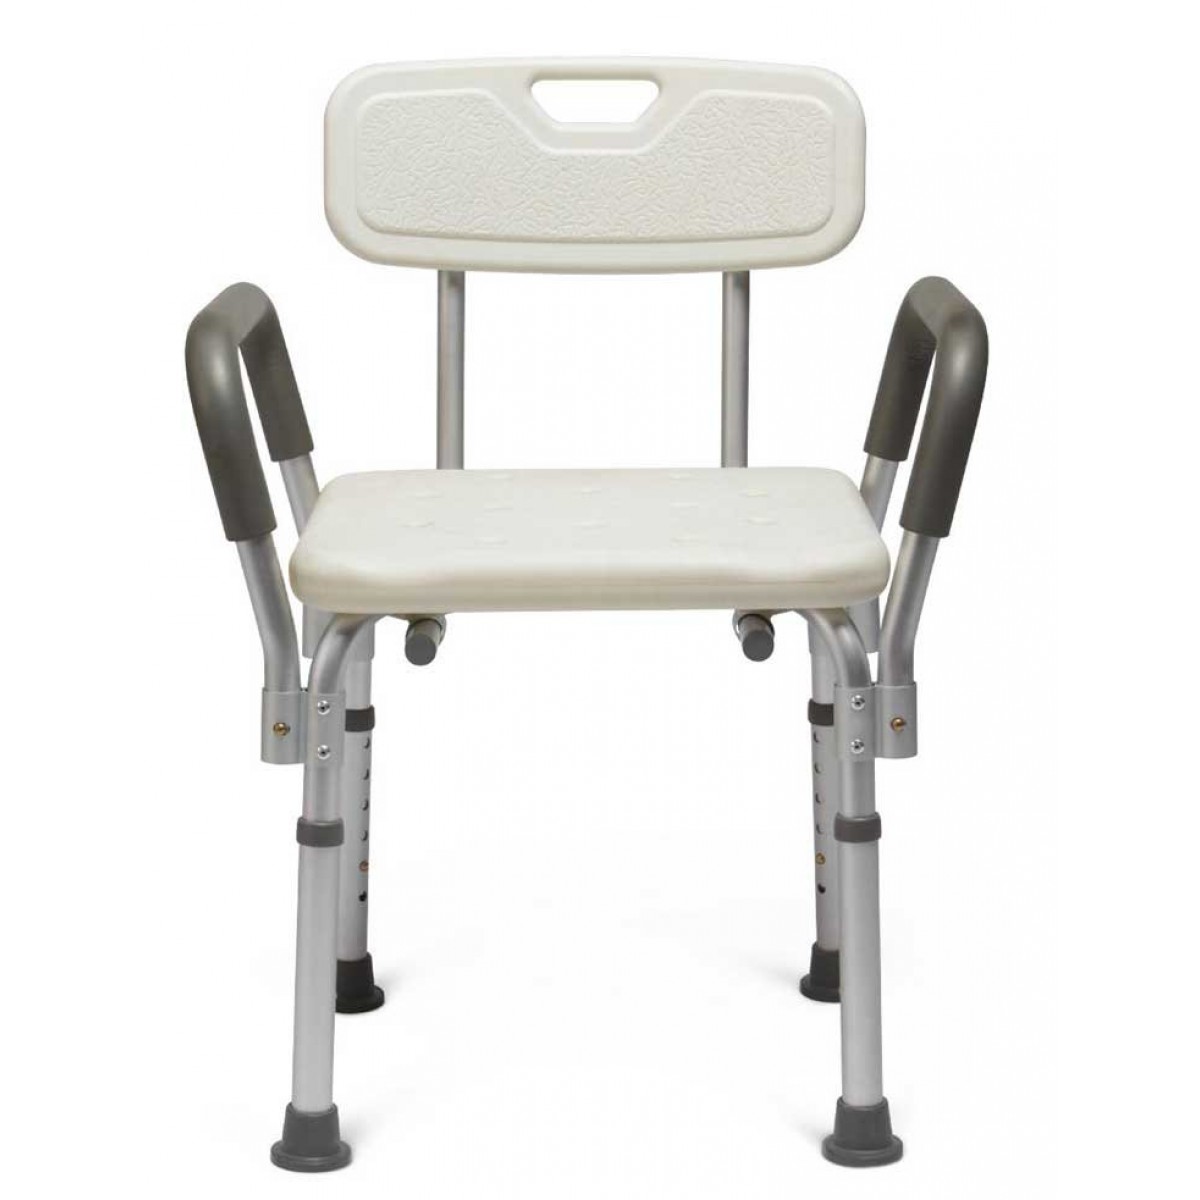 Bath Bench with High Arms w/back